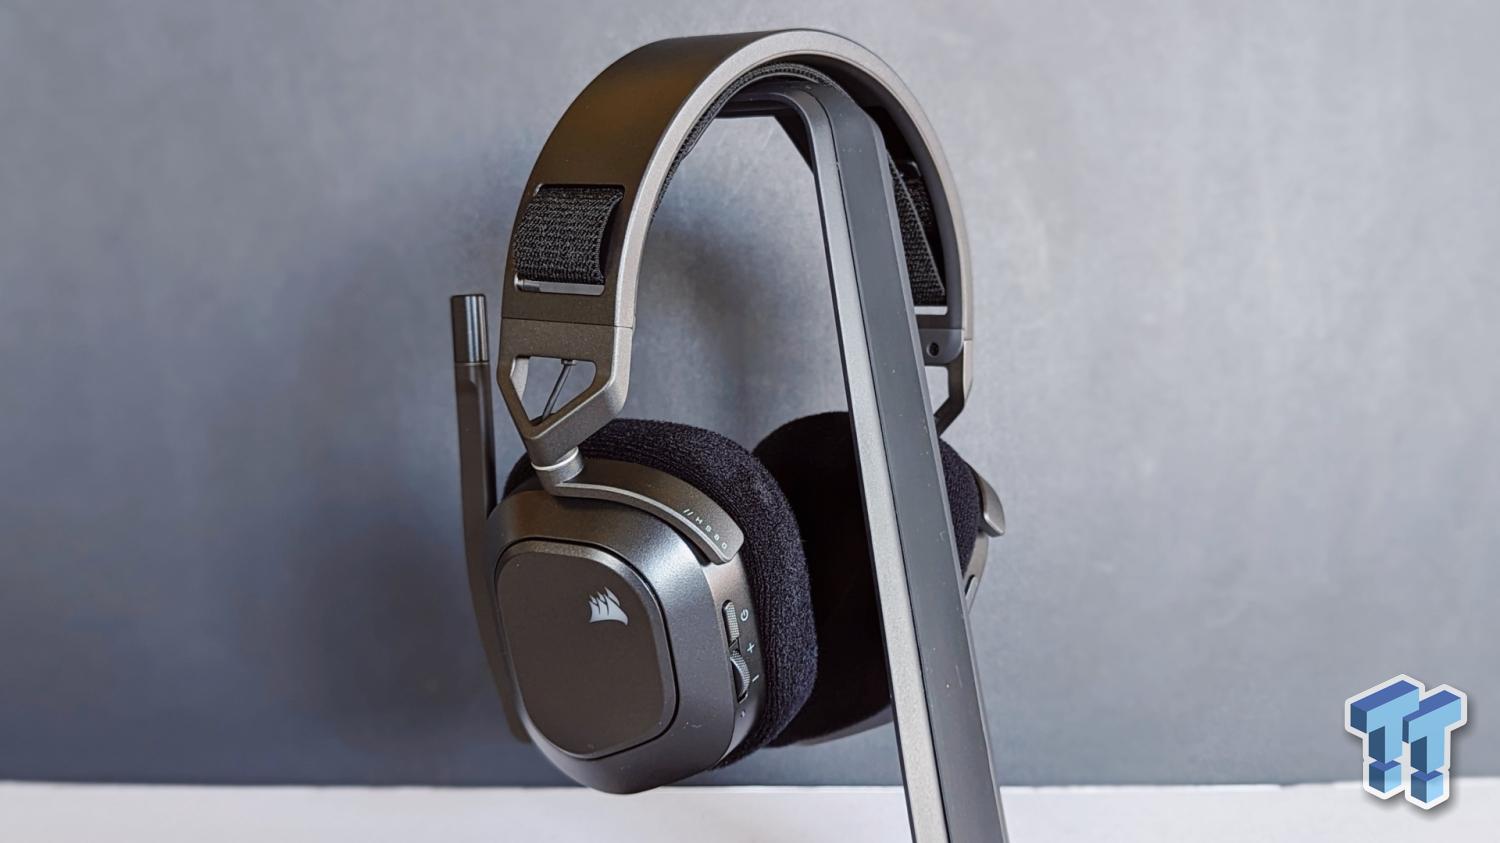 What are the design and comfort features of the Corsair HS80 Max Wireless  headset? - Quora